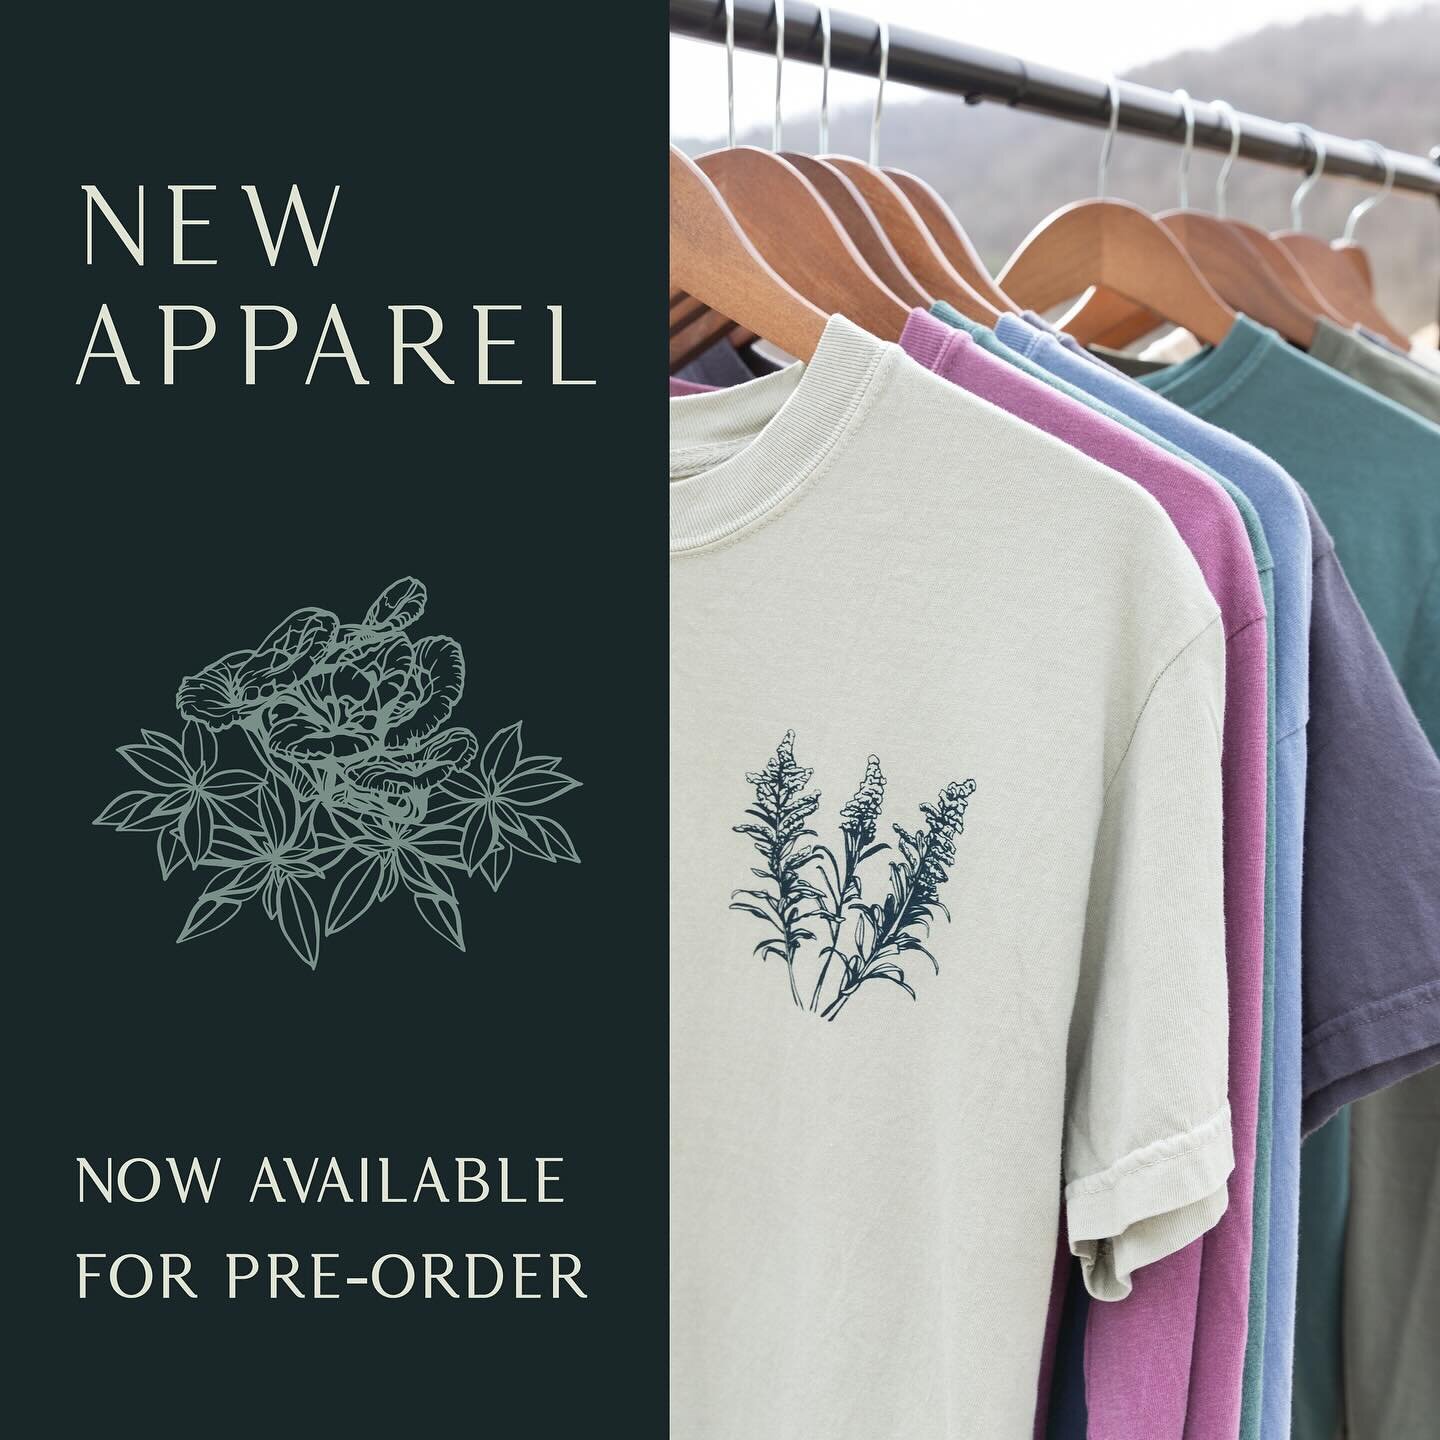 T-shirts are now available for pre-order on my website! 

All shirts are 100% cotton Comfort Colors and printed with eco-friendly water based ink. I have a range of sizes and color options available. 

jessdixondesigns.com 

If you live in Boone and 